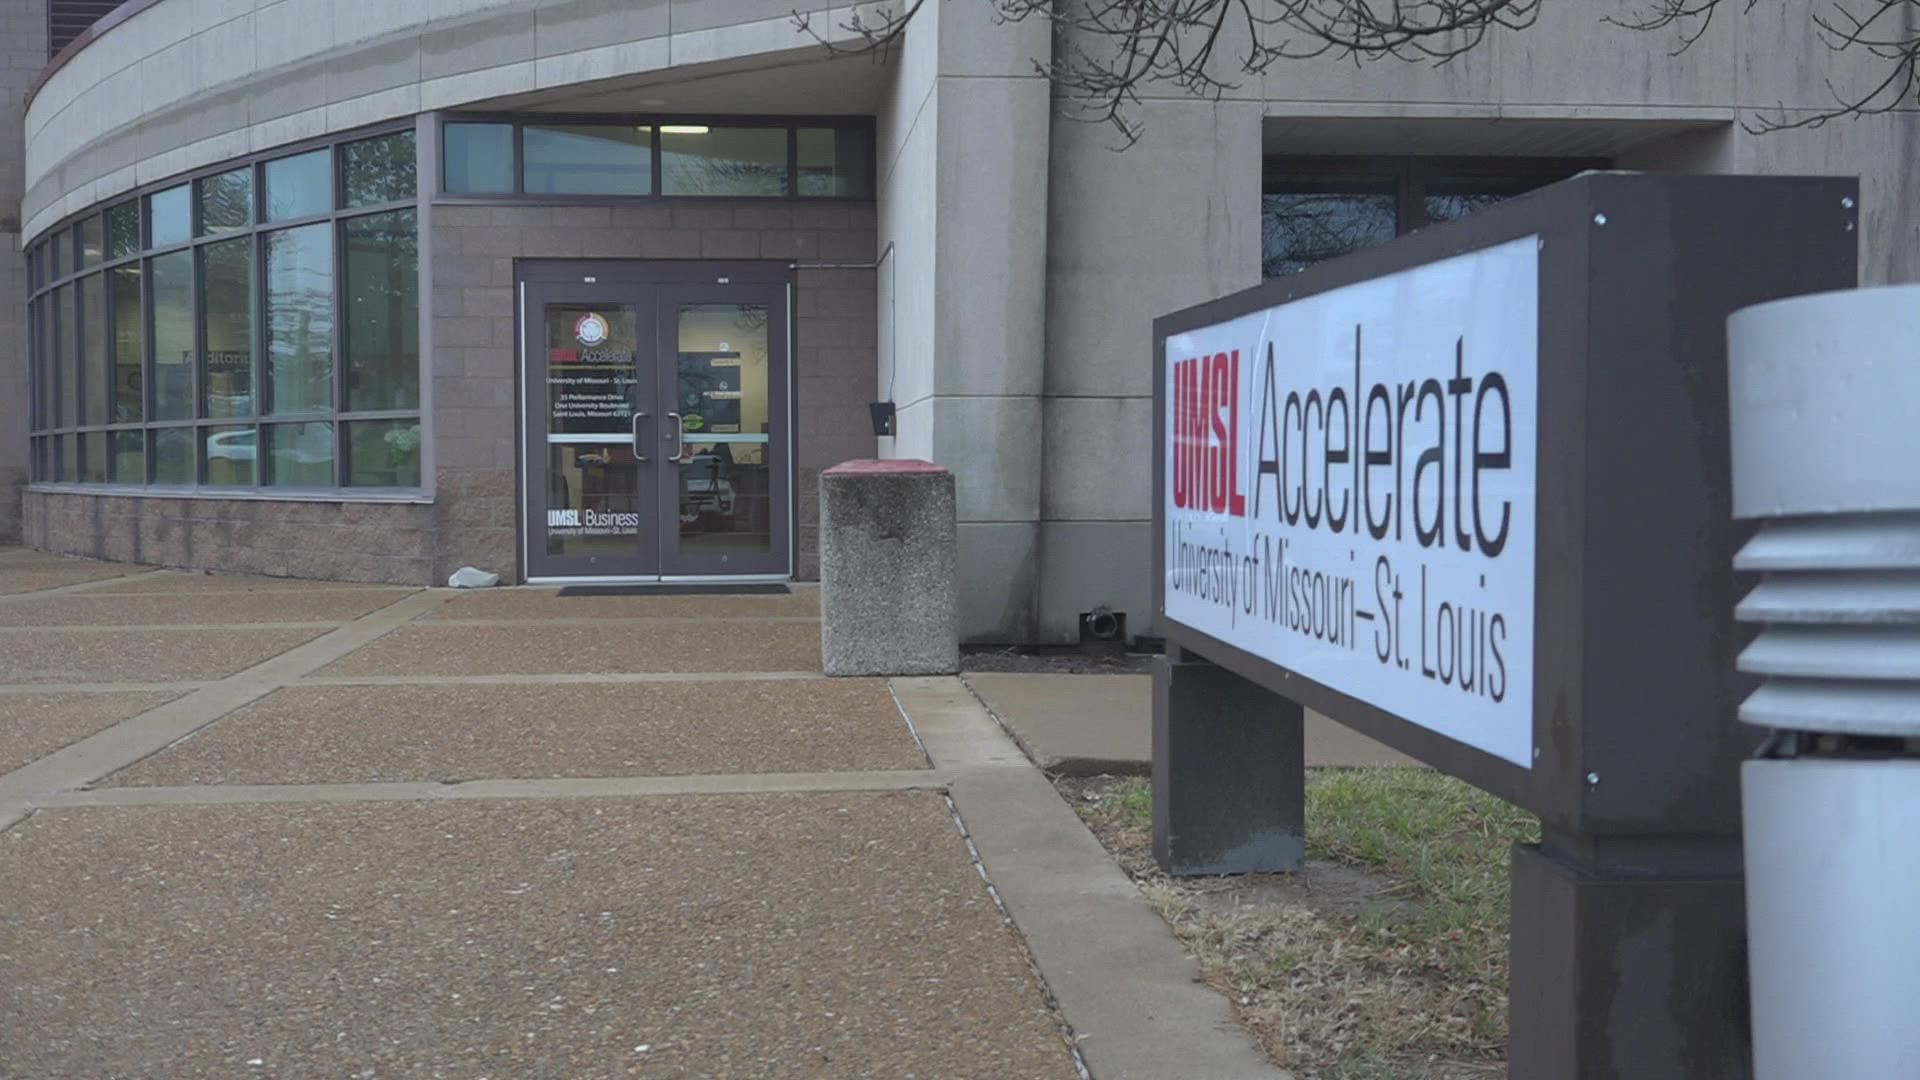 A program at UMSL awarded $50,000 grants to six underrepresented entrepreneurs. The winners will also participate in a course that includes connections to investors.